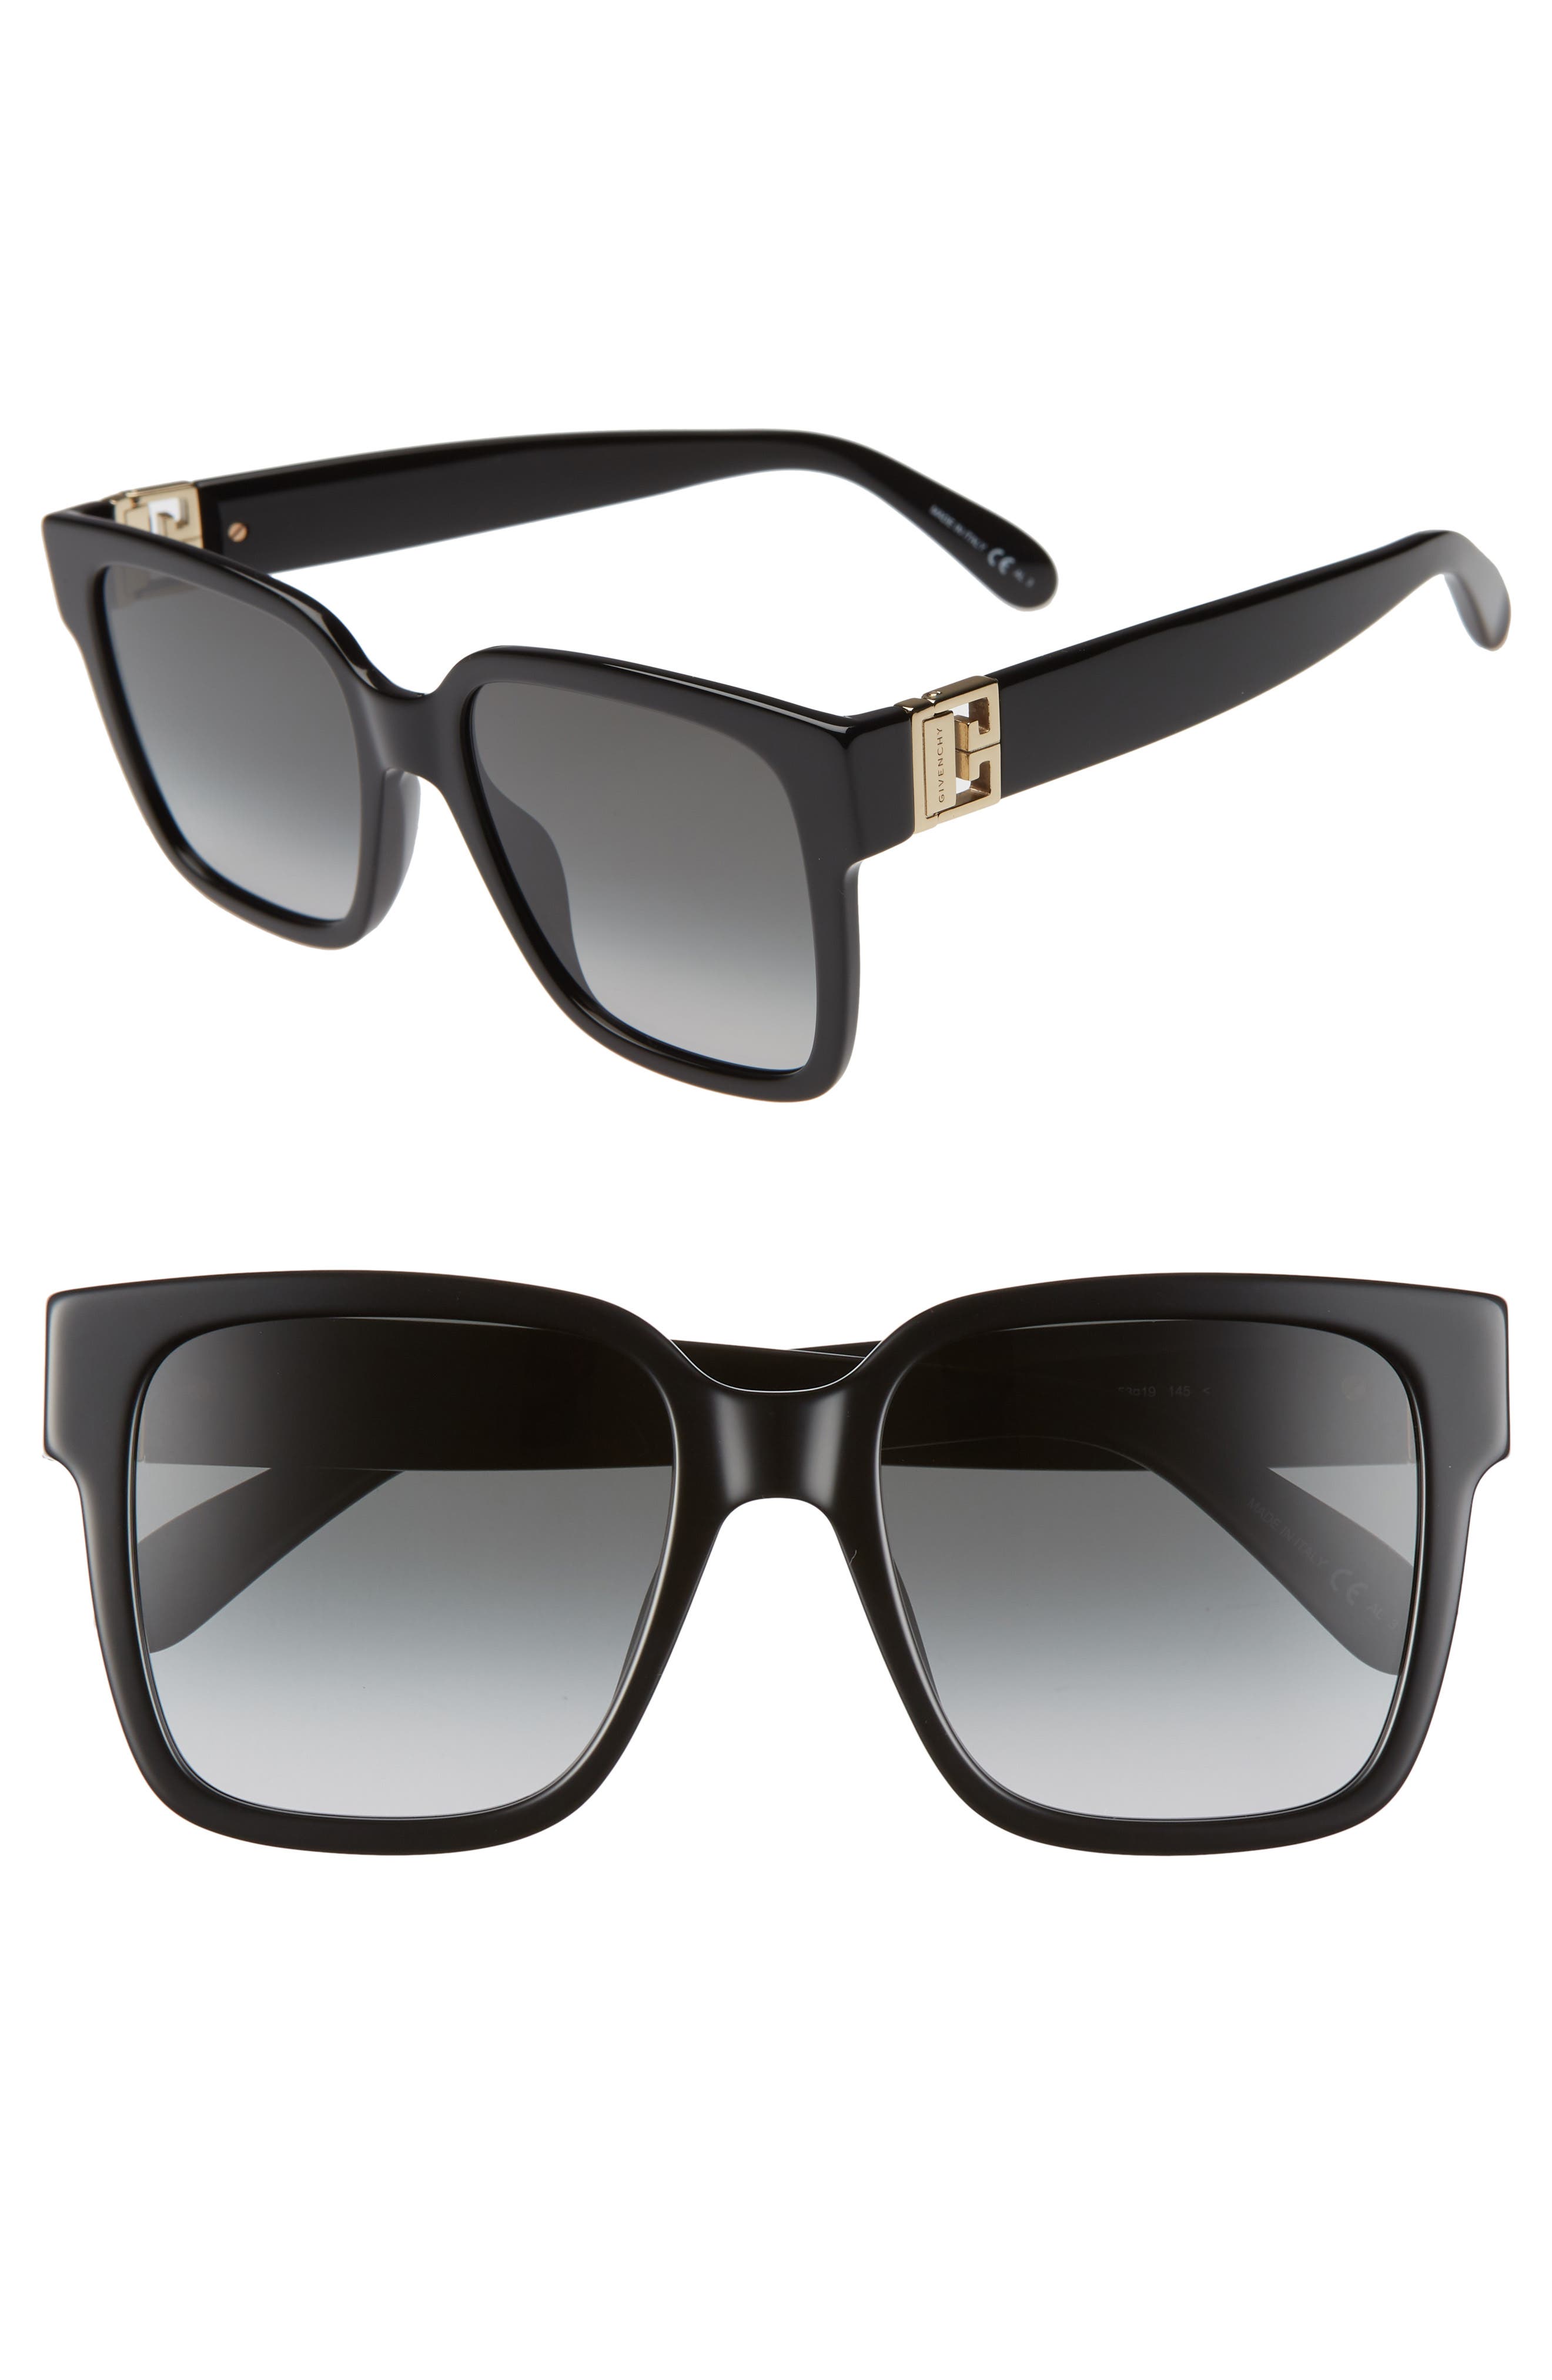 UPC 716736205588 product image for Givenchy 53mm Square Sunglasses in Black/Dk Grey Gradient at Nordstrom | upcitemdb.com